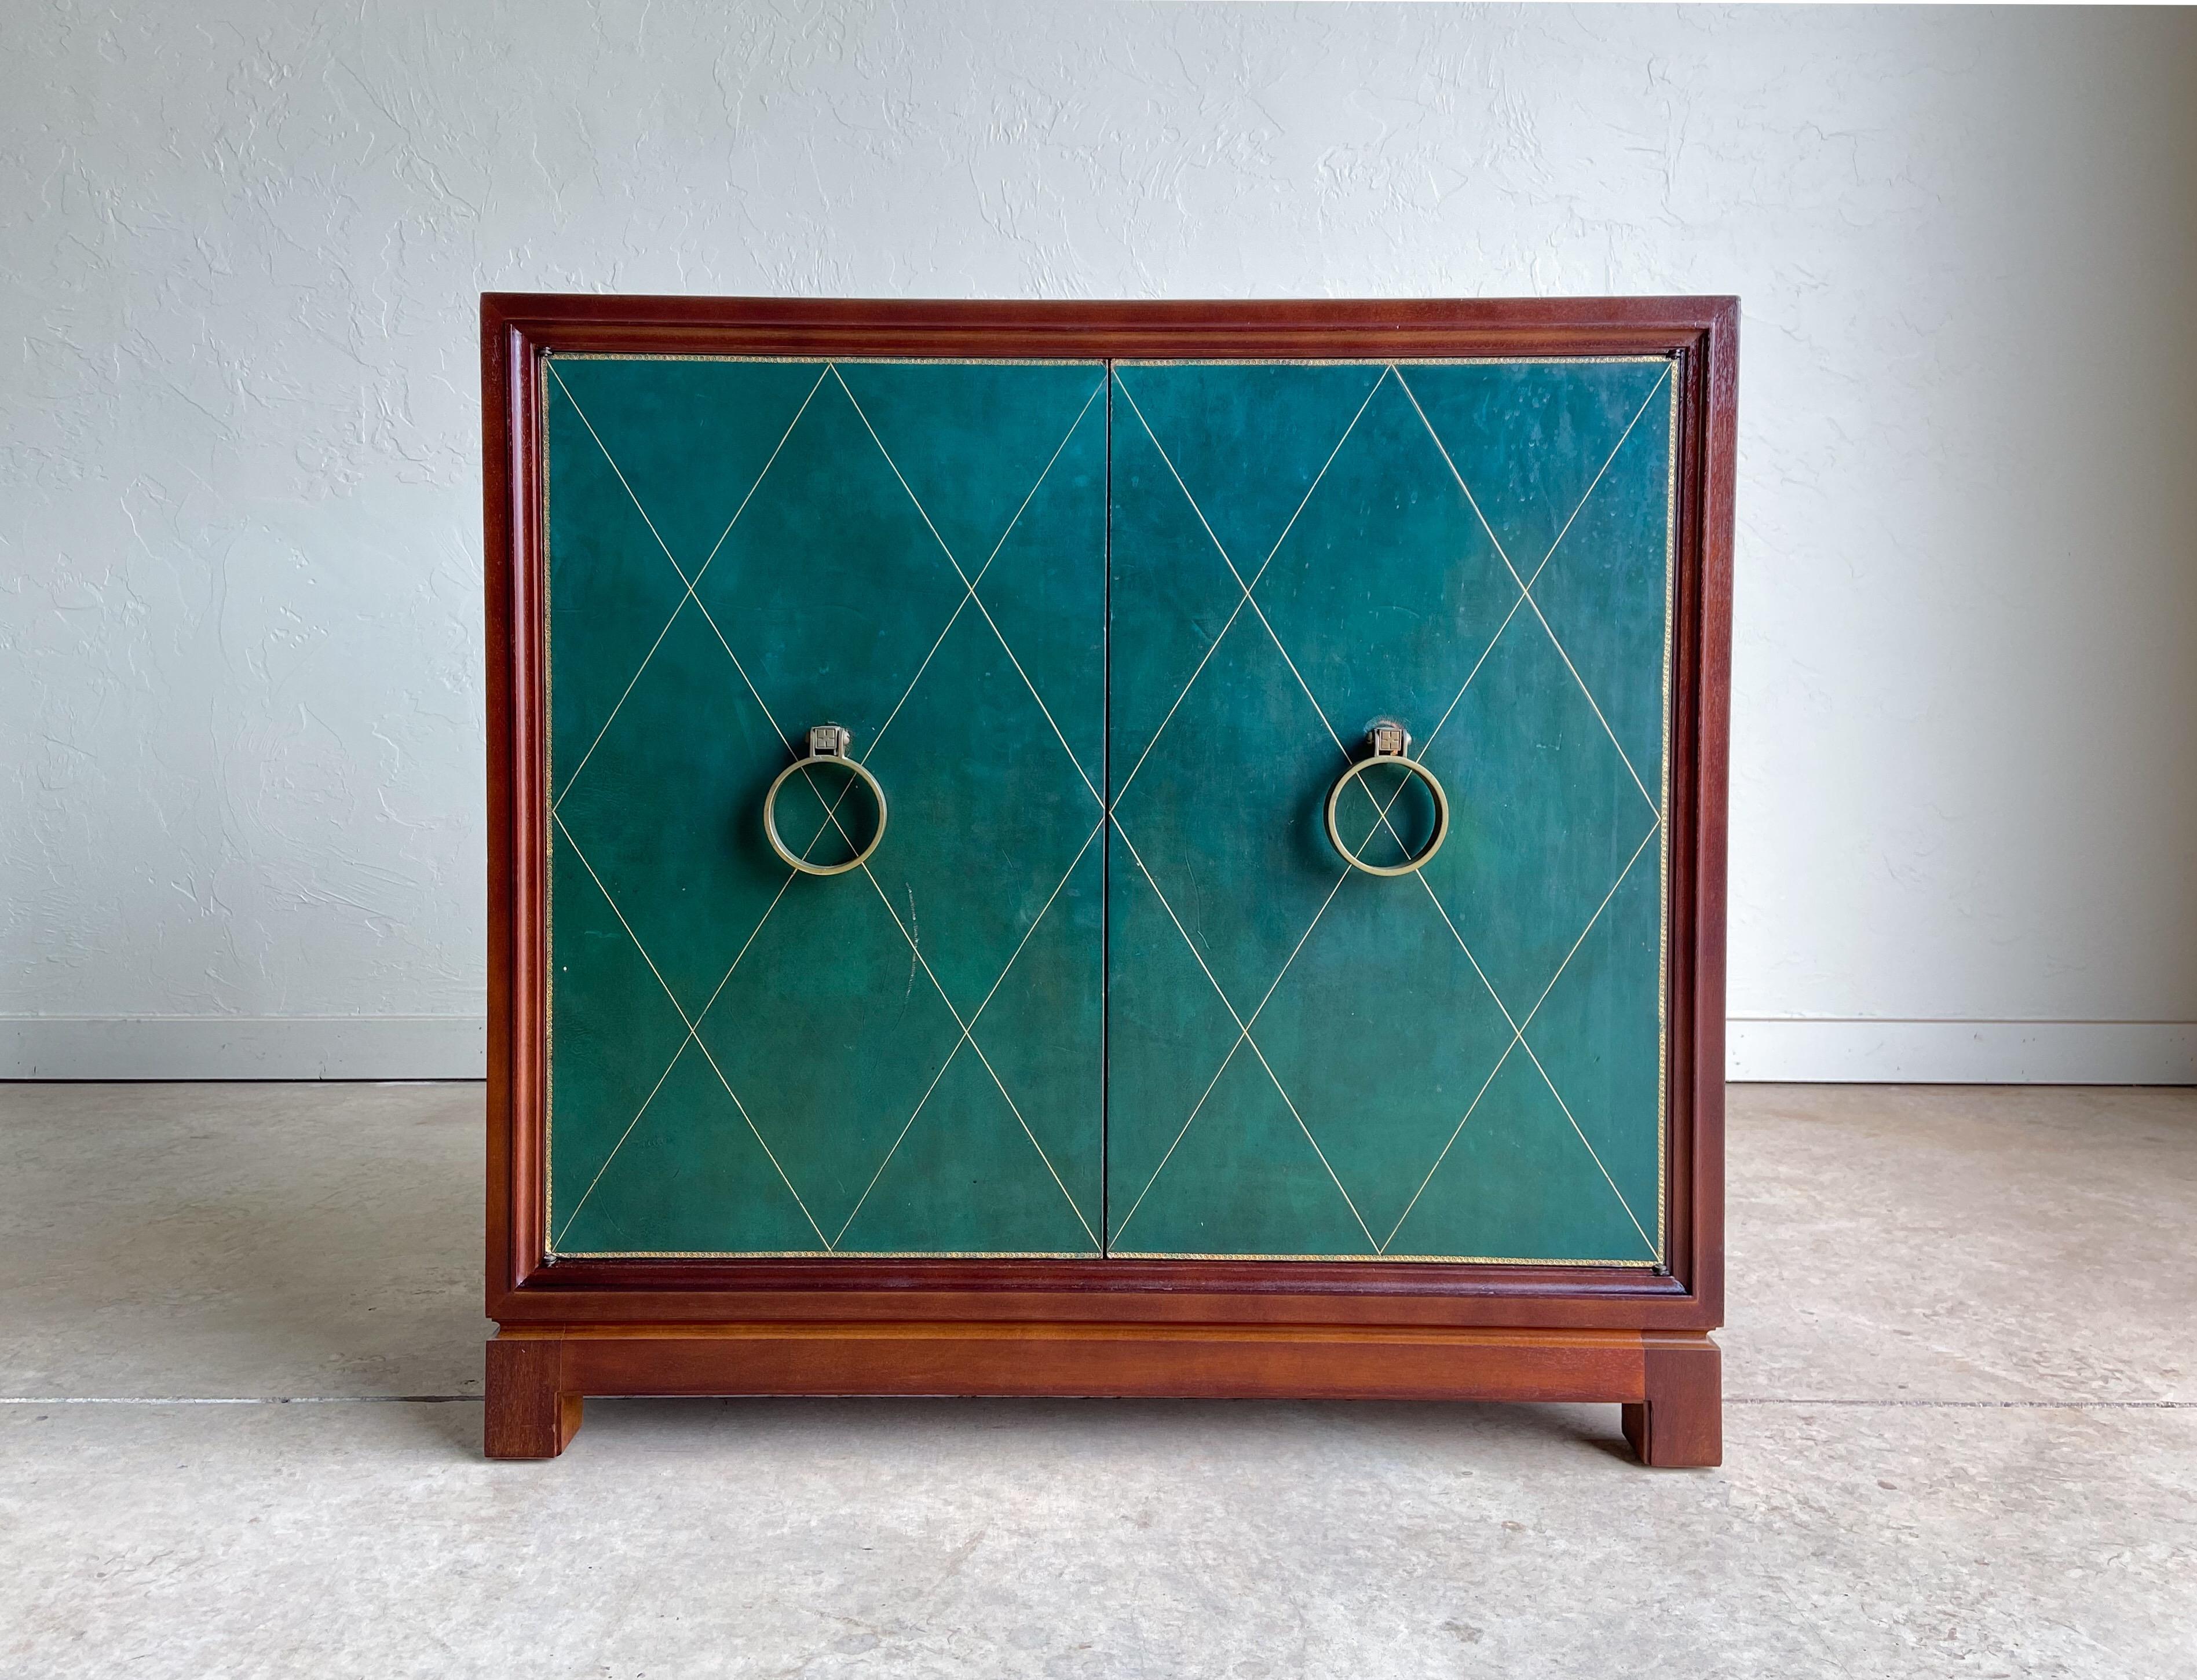 Offered is a somewhat uncommon cabinet designed by Tommi Parzinger and produced by Charak Modern. 

Featuring mahogany wood construction in a lovely dark brown finish. The dark green leather doors are accented with a beautiful geometric gold inlay